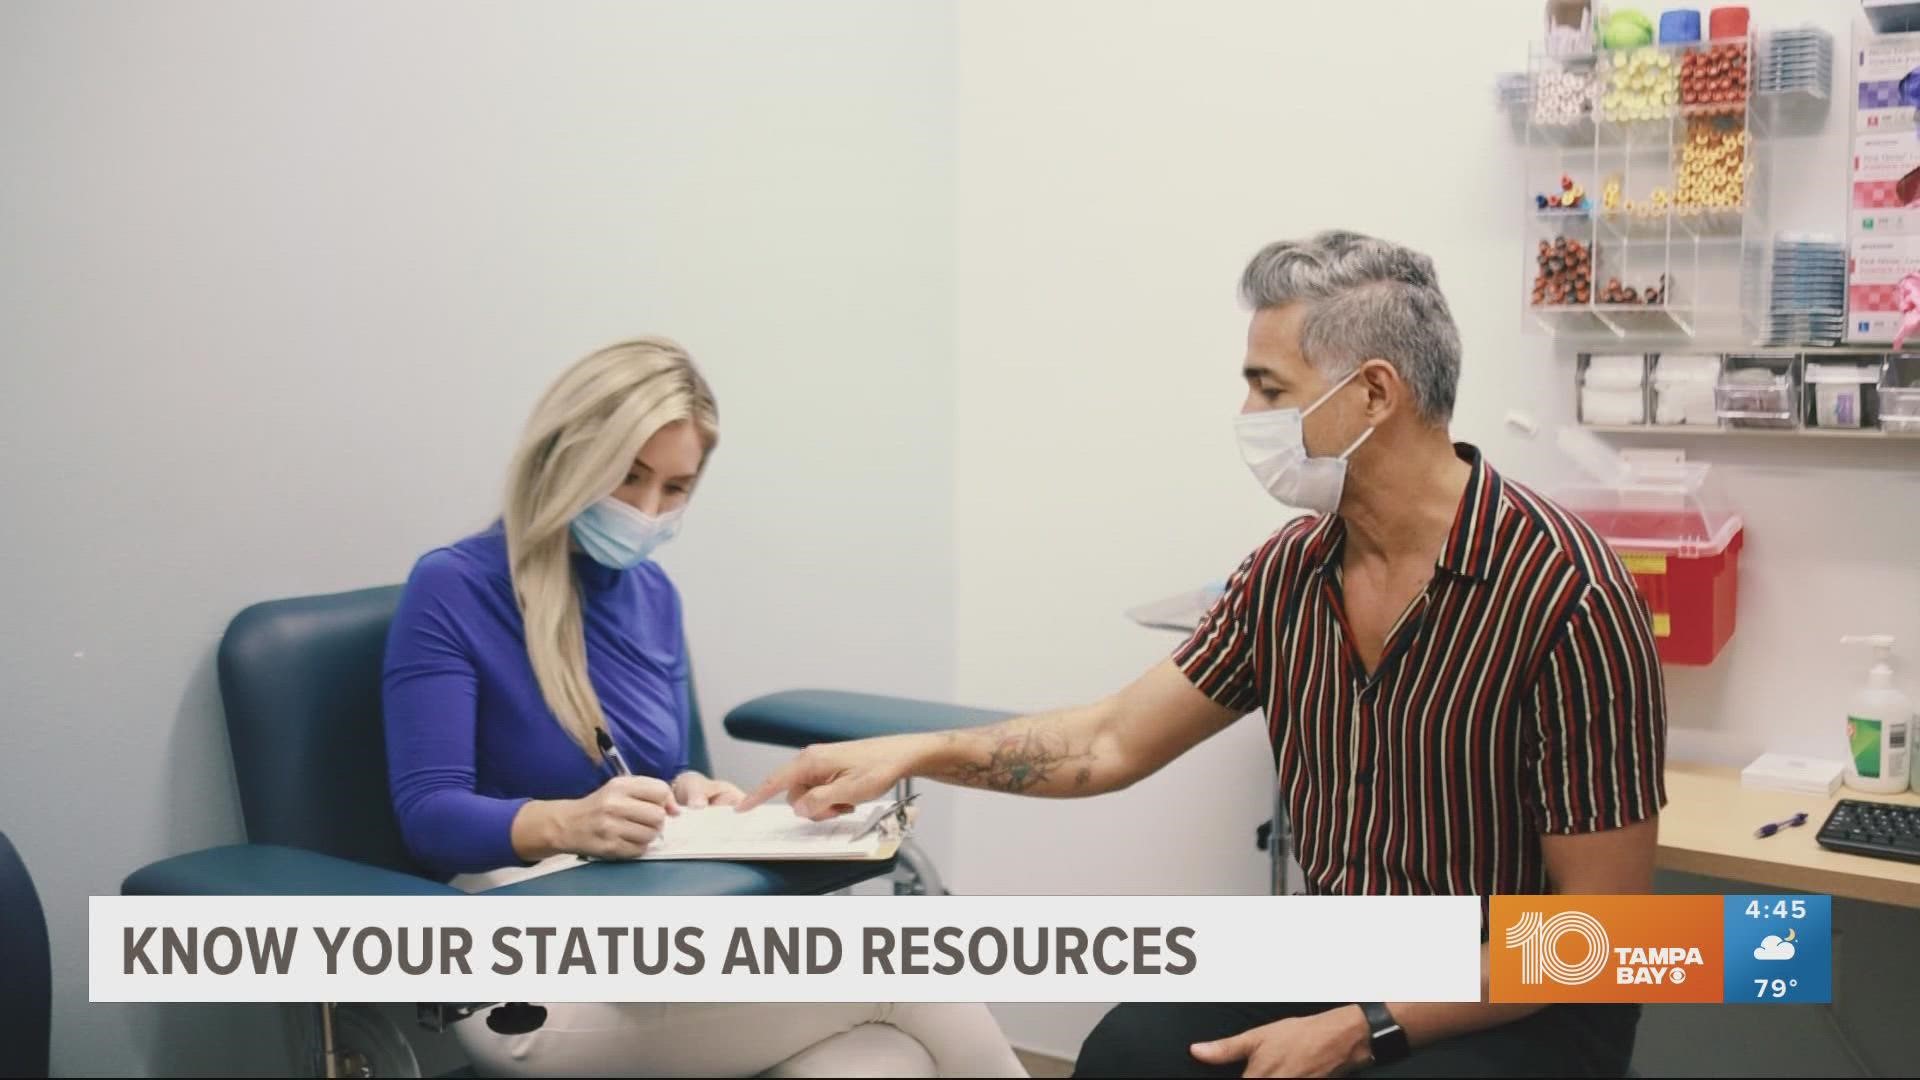 HIV and STI testing and resources are more widely available throughout the Tampa Bay area.